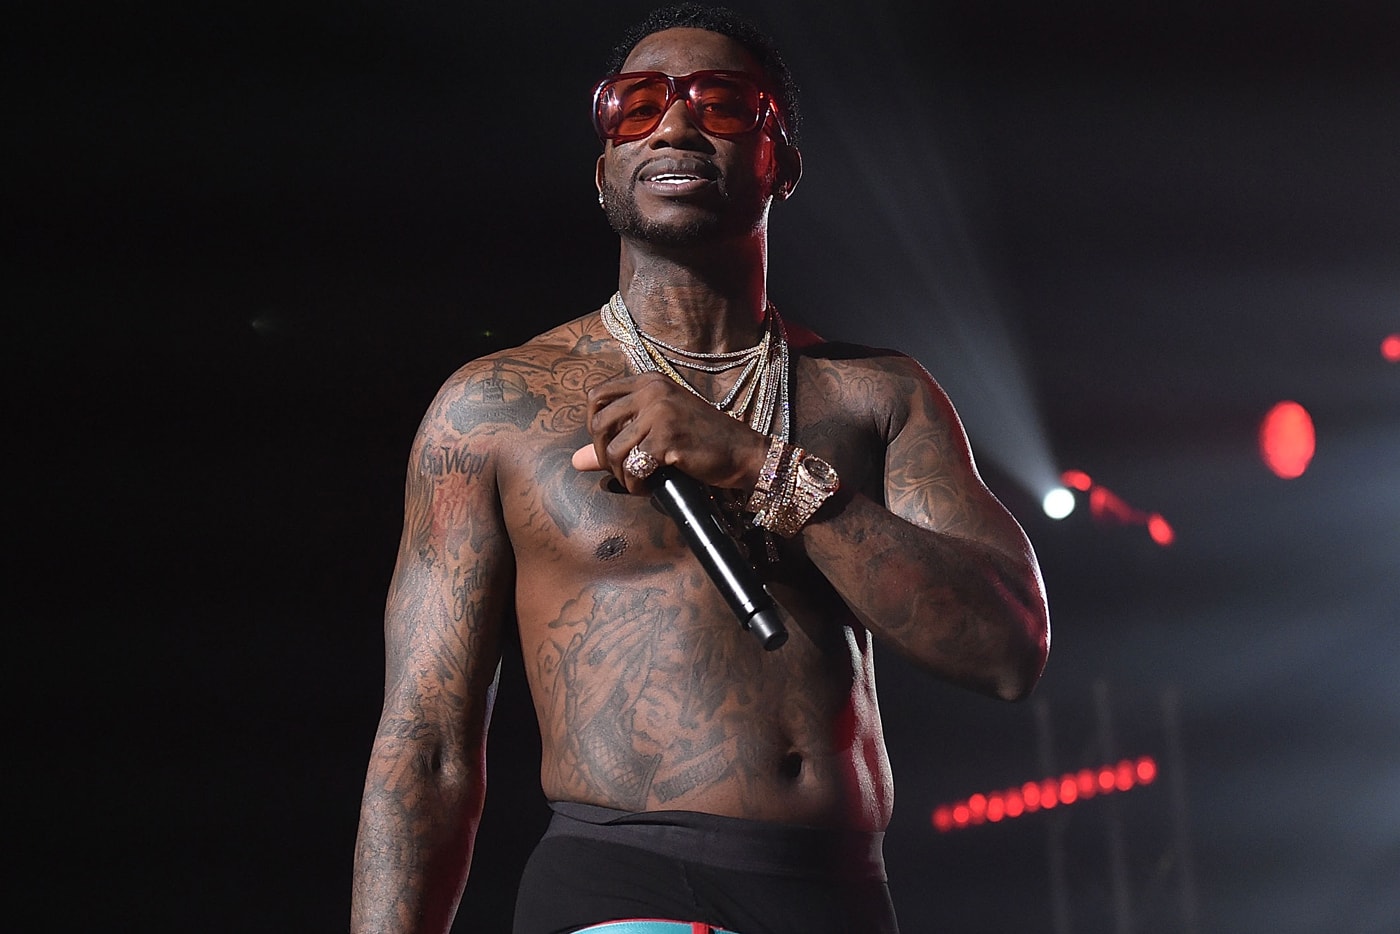 gucci-mane-everybody-looking-mike-will-made-it-interview-fader